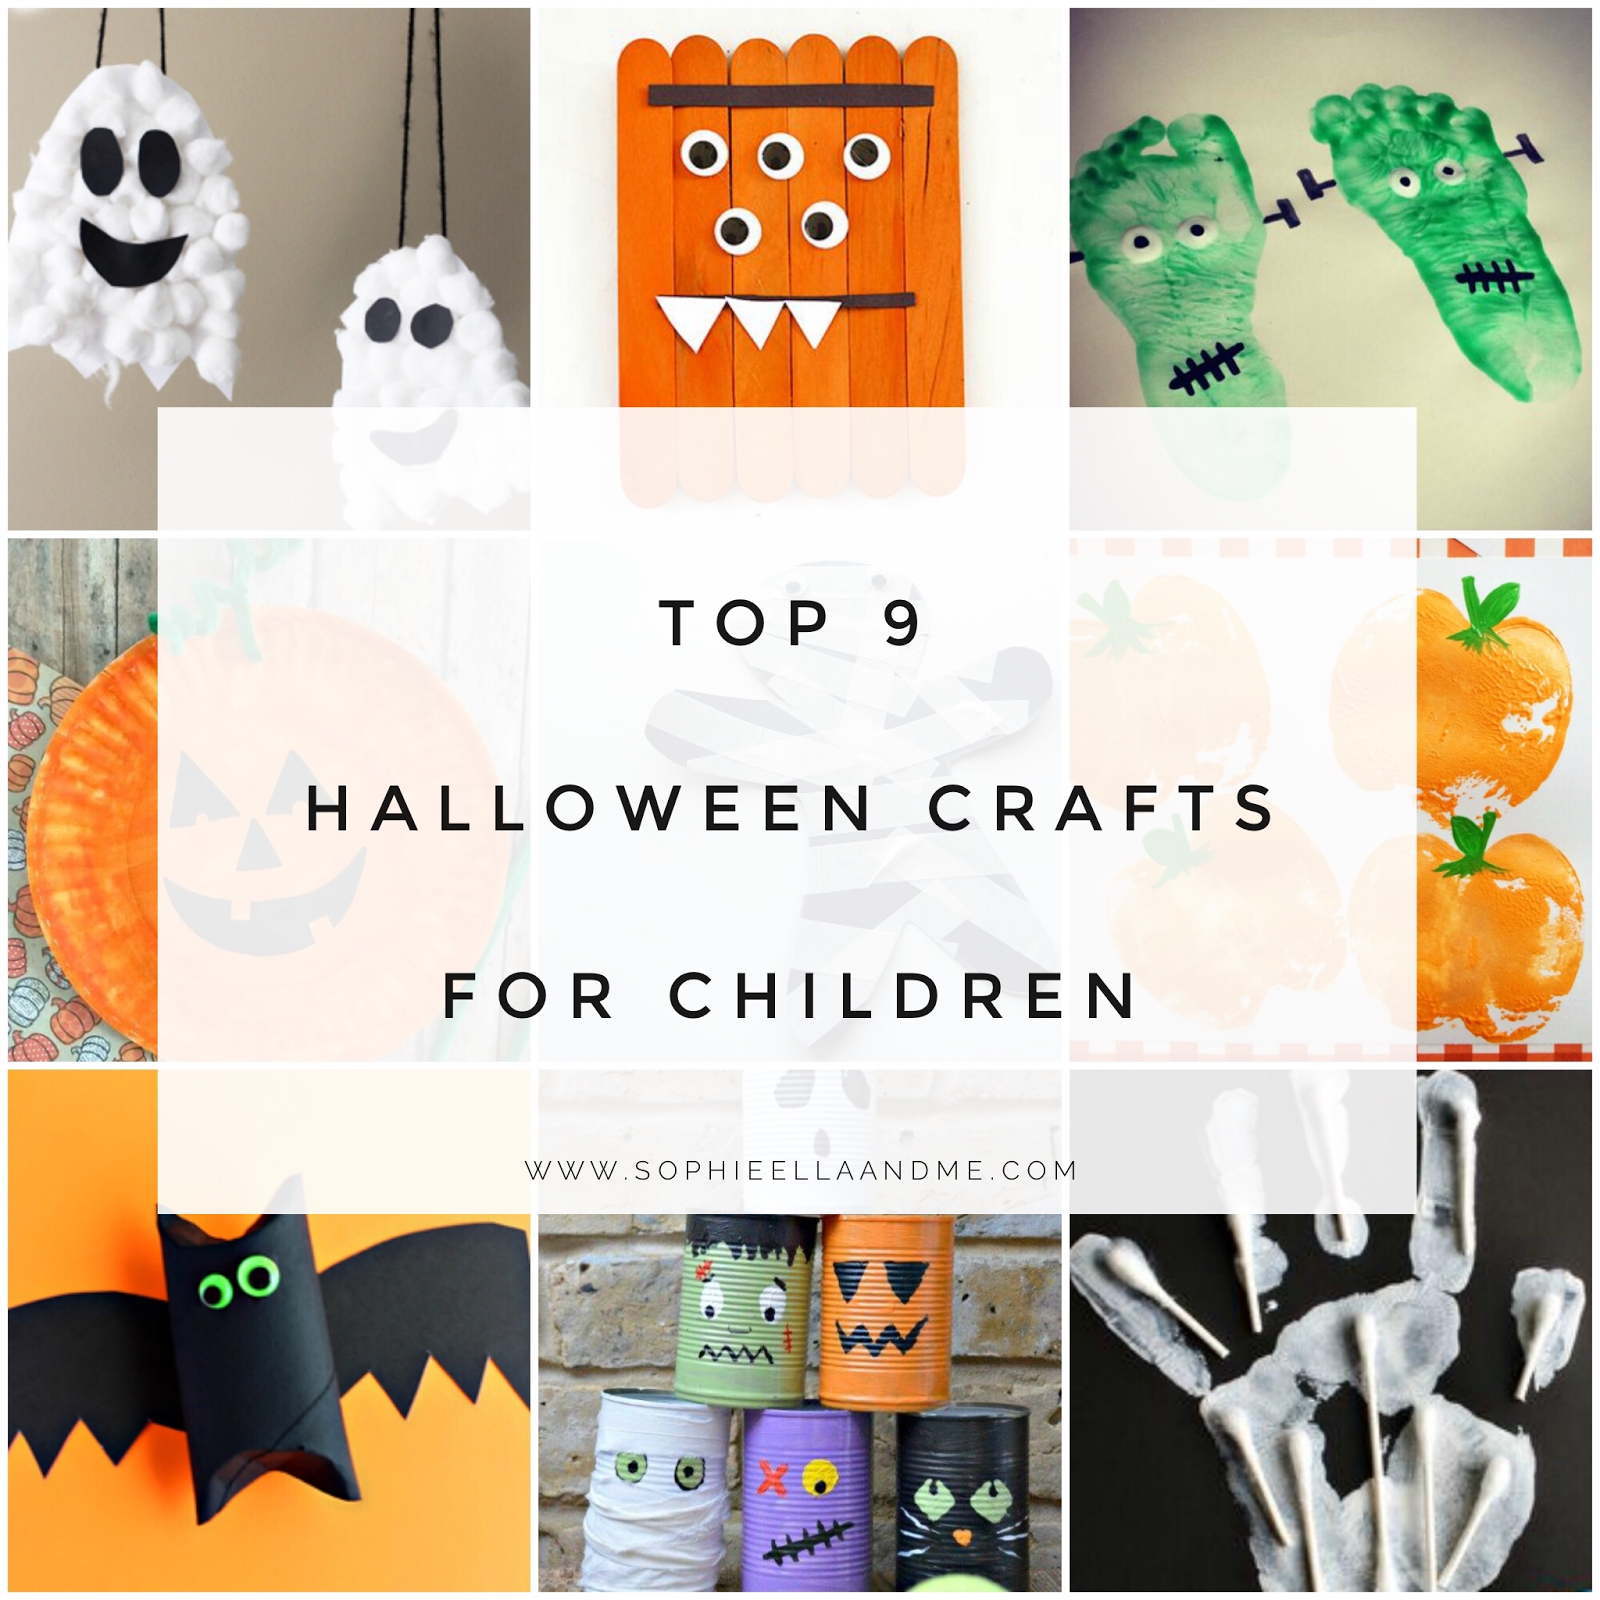 Top 9 Halloween Crafts For Children | Sophie Ella and Me